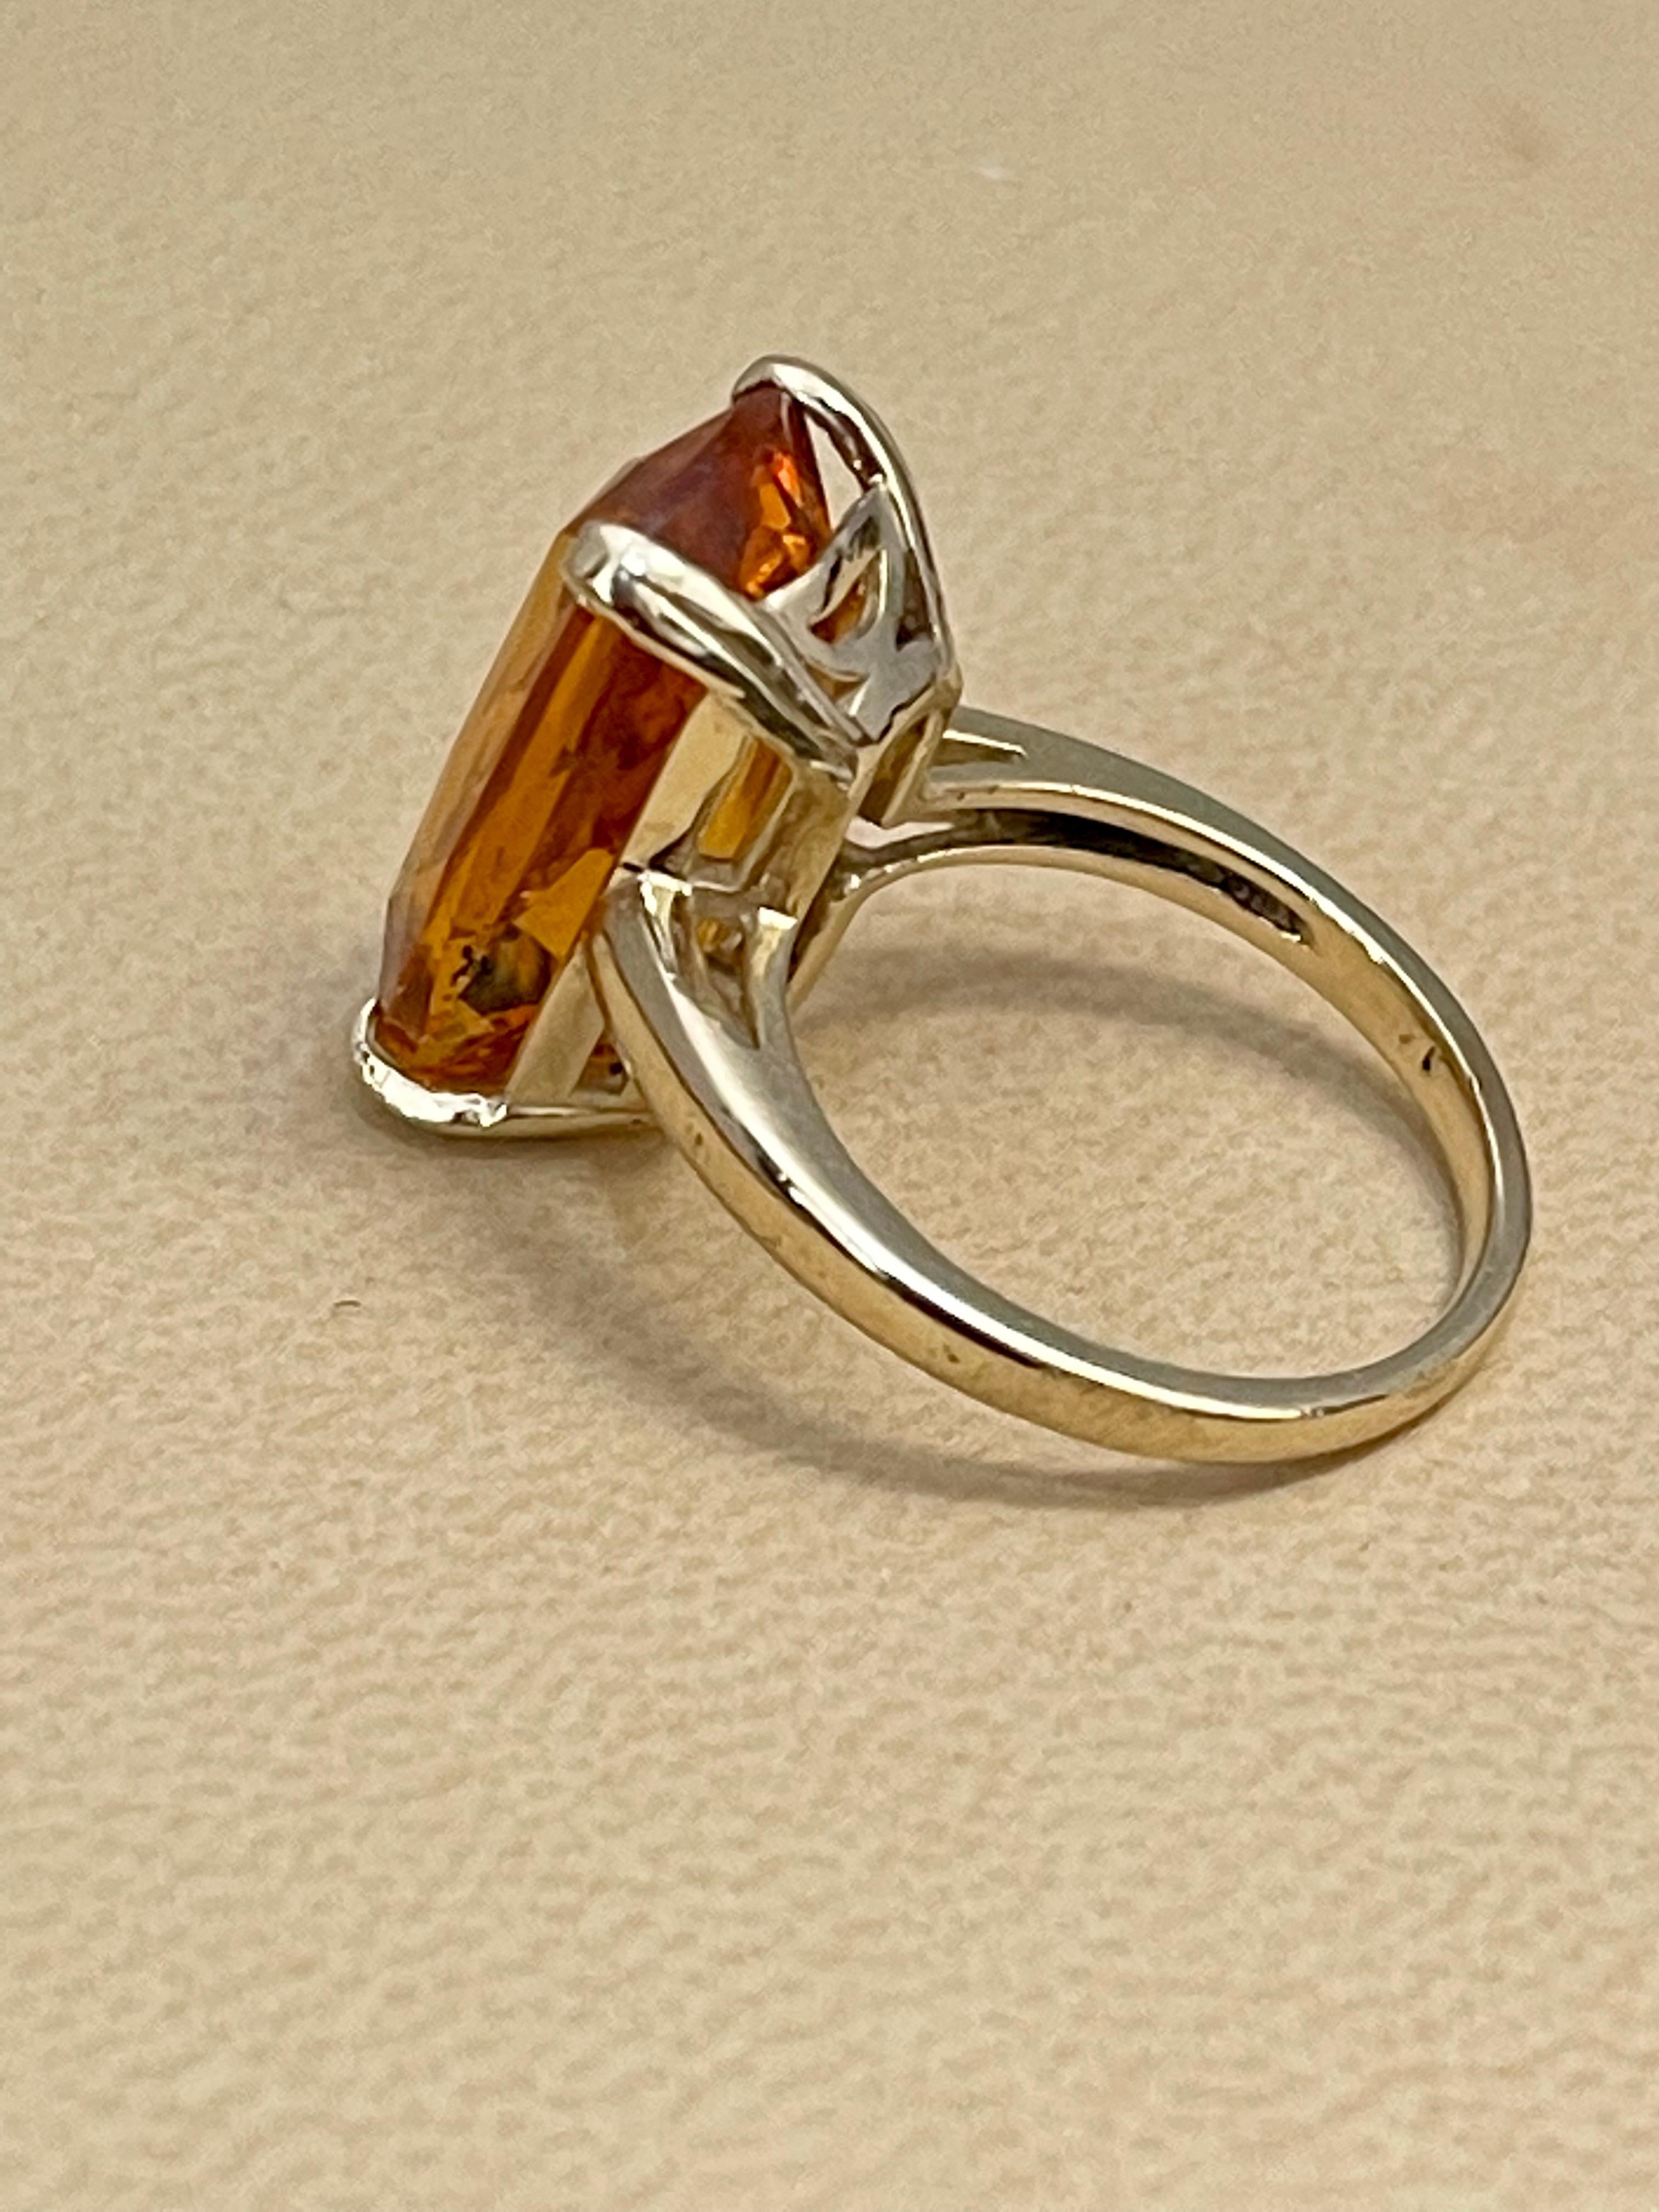 6 Carat Natural Long Cushion Shape Citrine Cocktail Ring in 14 Karat Yellow Gold For Sale 7